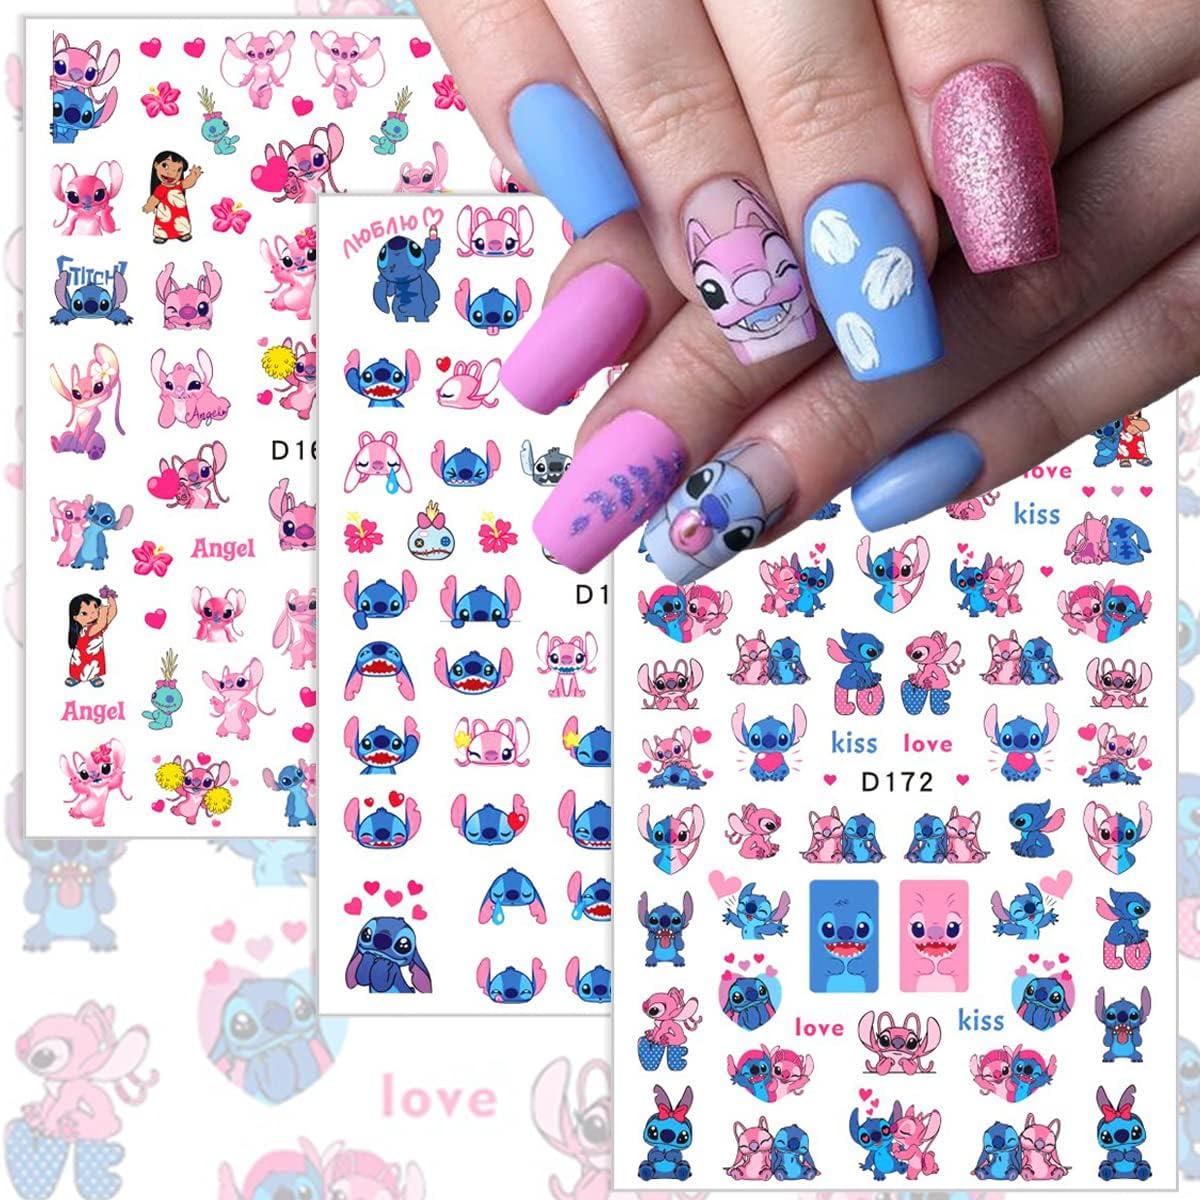 6 Sheets Lilo and Stitch Nail Art Stickers Decals 6 Sheets Cute